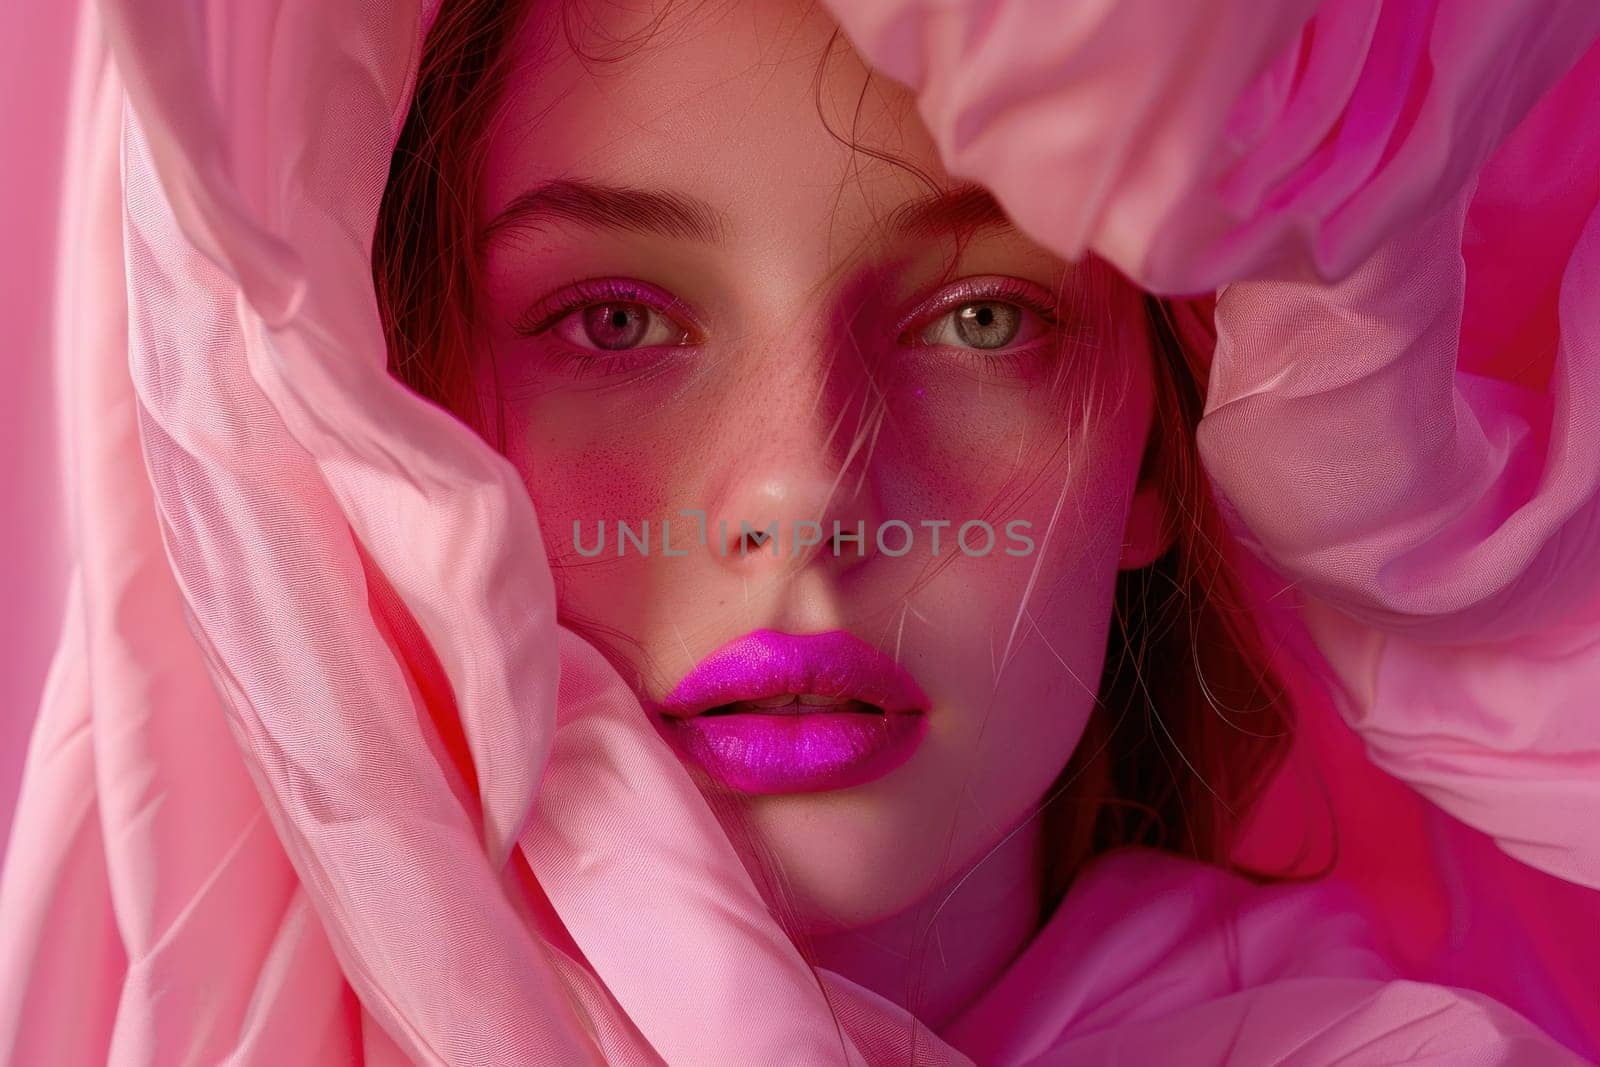 Woman in pink scarf and blanket relaxing at home in cozy setting with bright pink lips and fashionable style